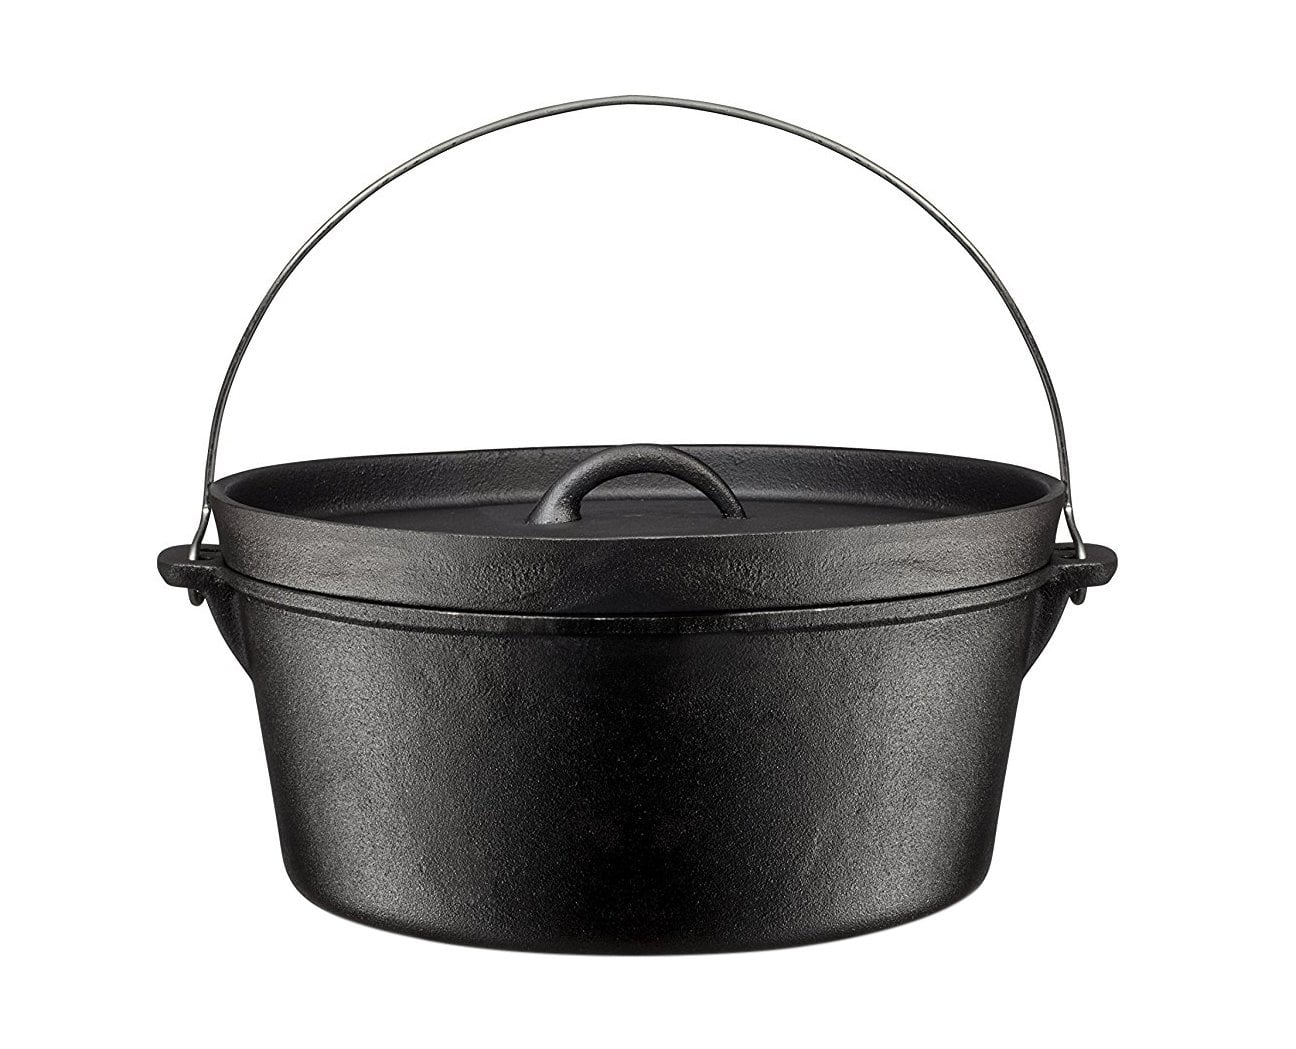 Pre-Seasoned Cast Iron Dutch Oven/Fry Pot with Basket and Stainless Handle  8 quart